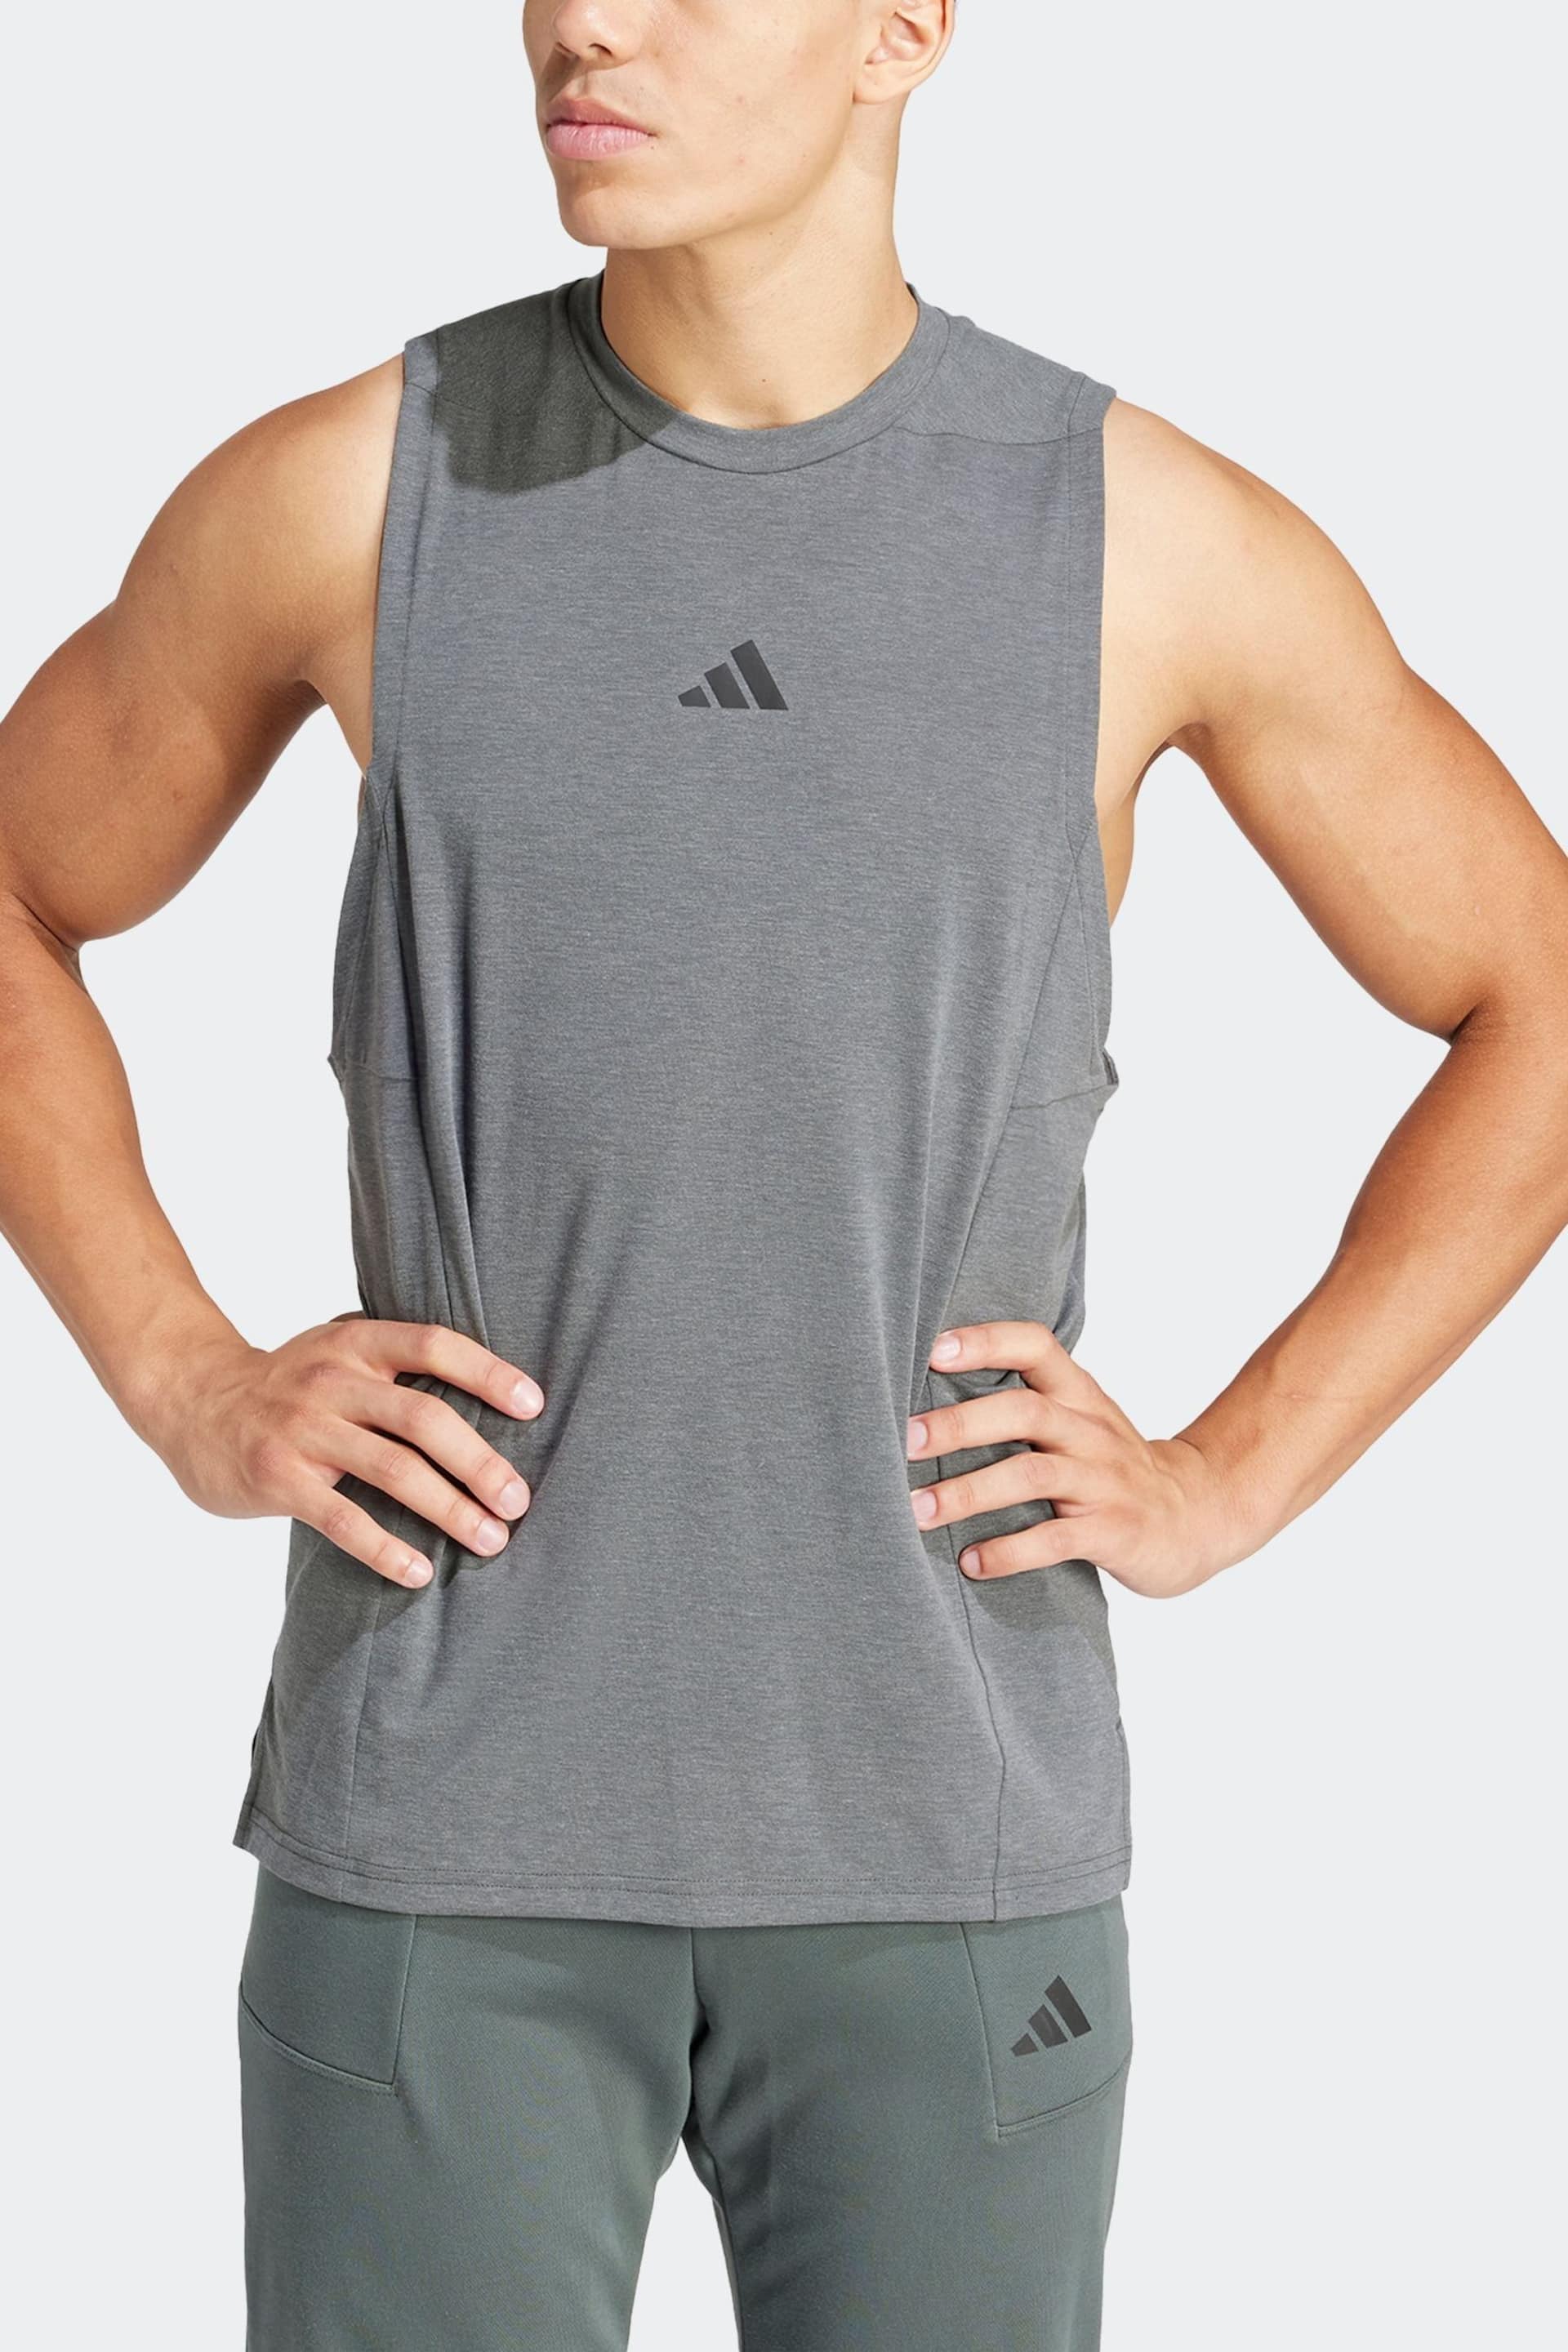 adidas Dark Grey Designed for Training Workout Tank Top - Image 2 of 7